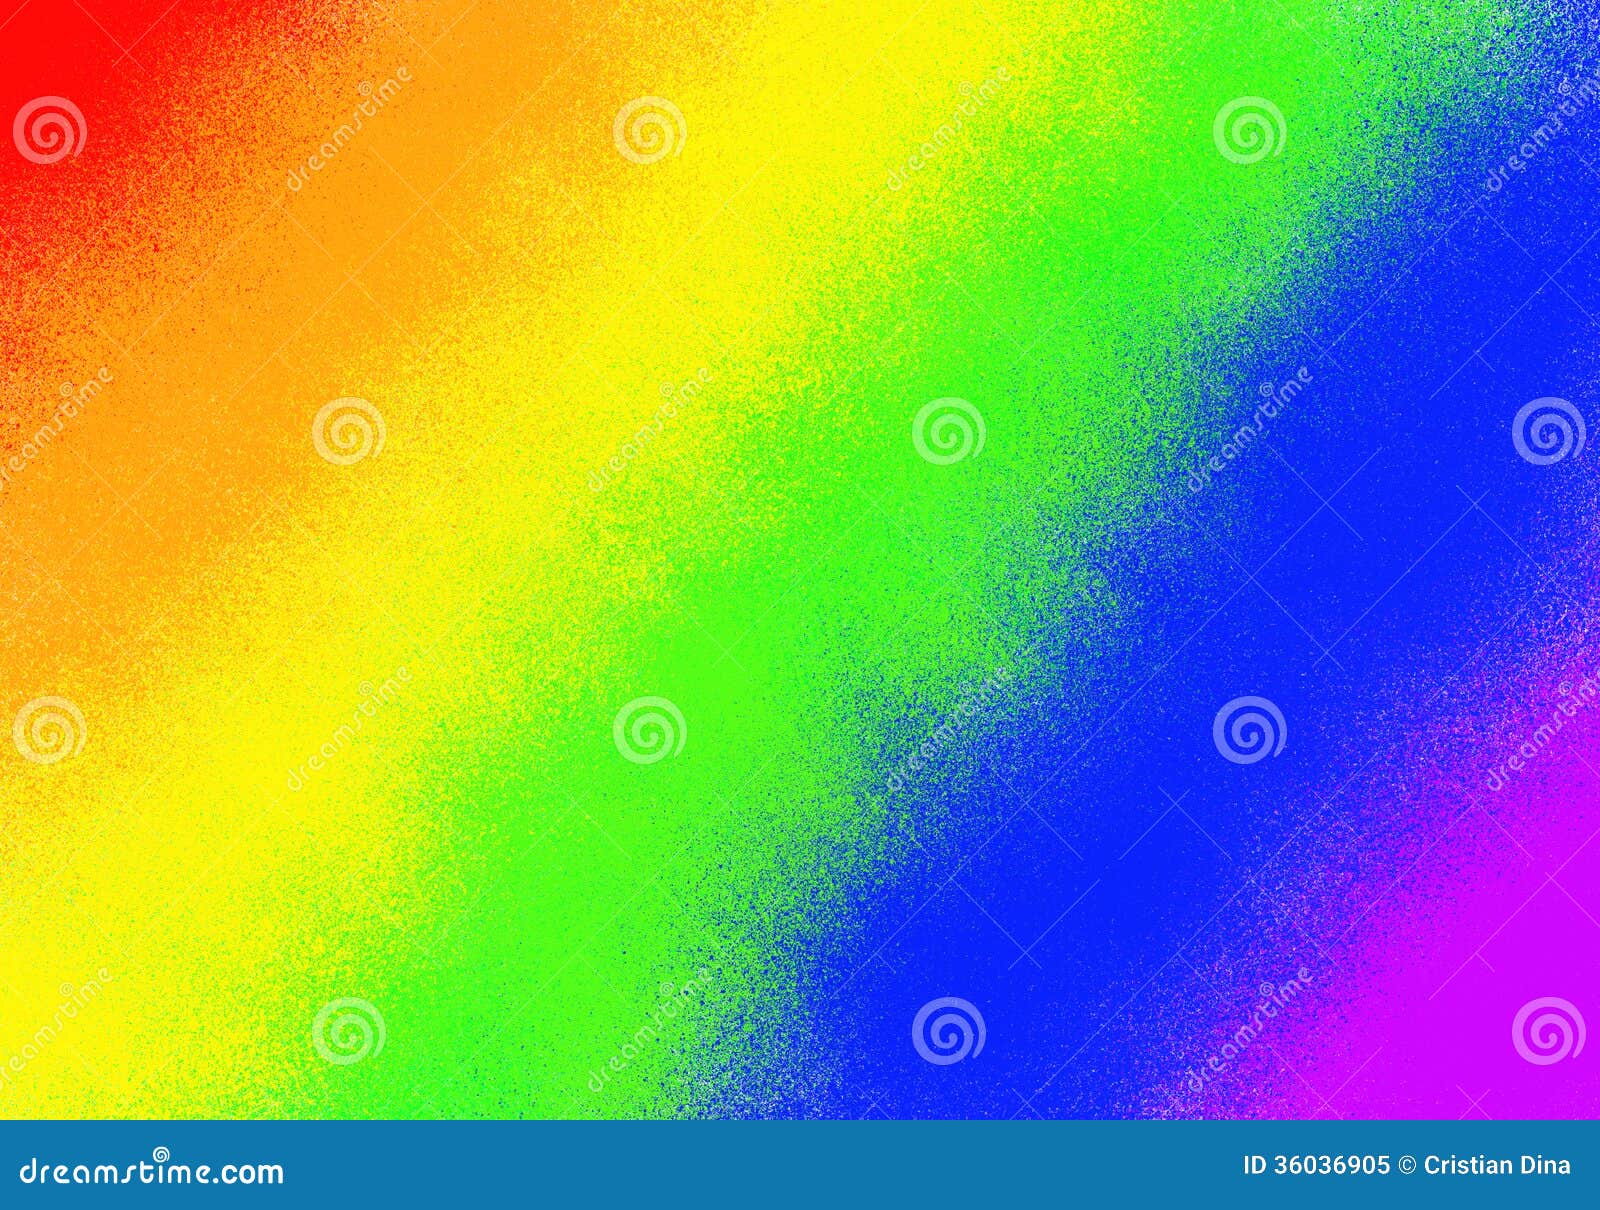 grunge abstract pride background